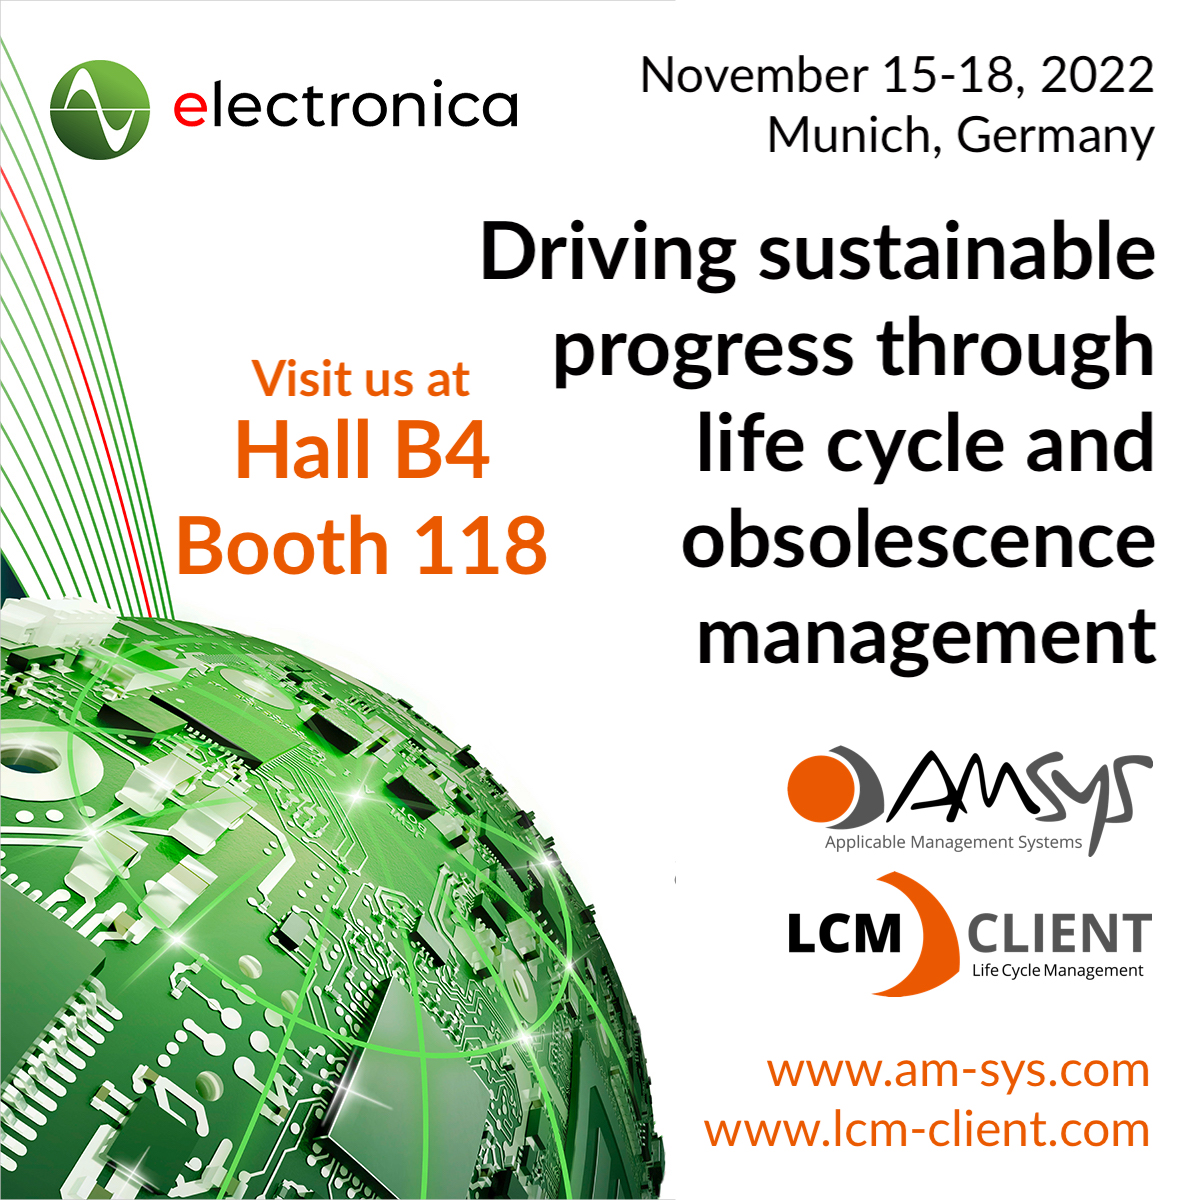 Join AMSYS at electronica 2022 - B4.118